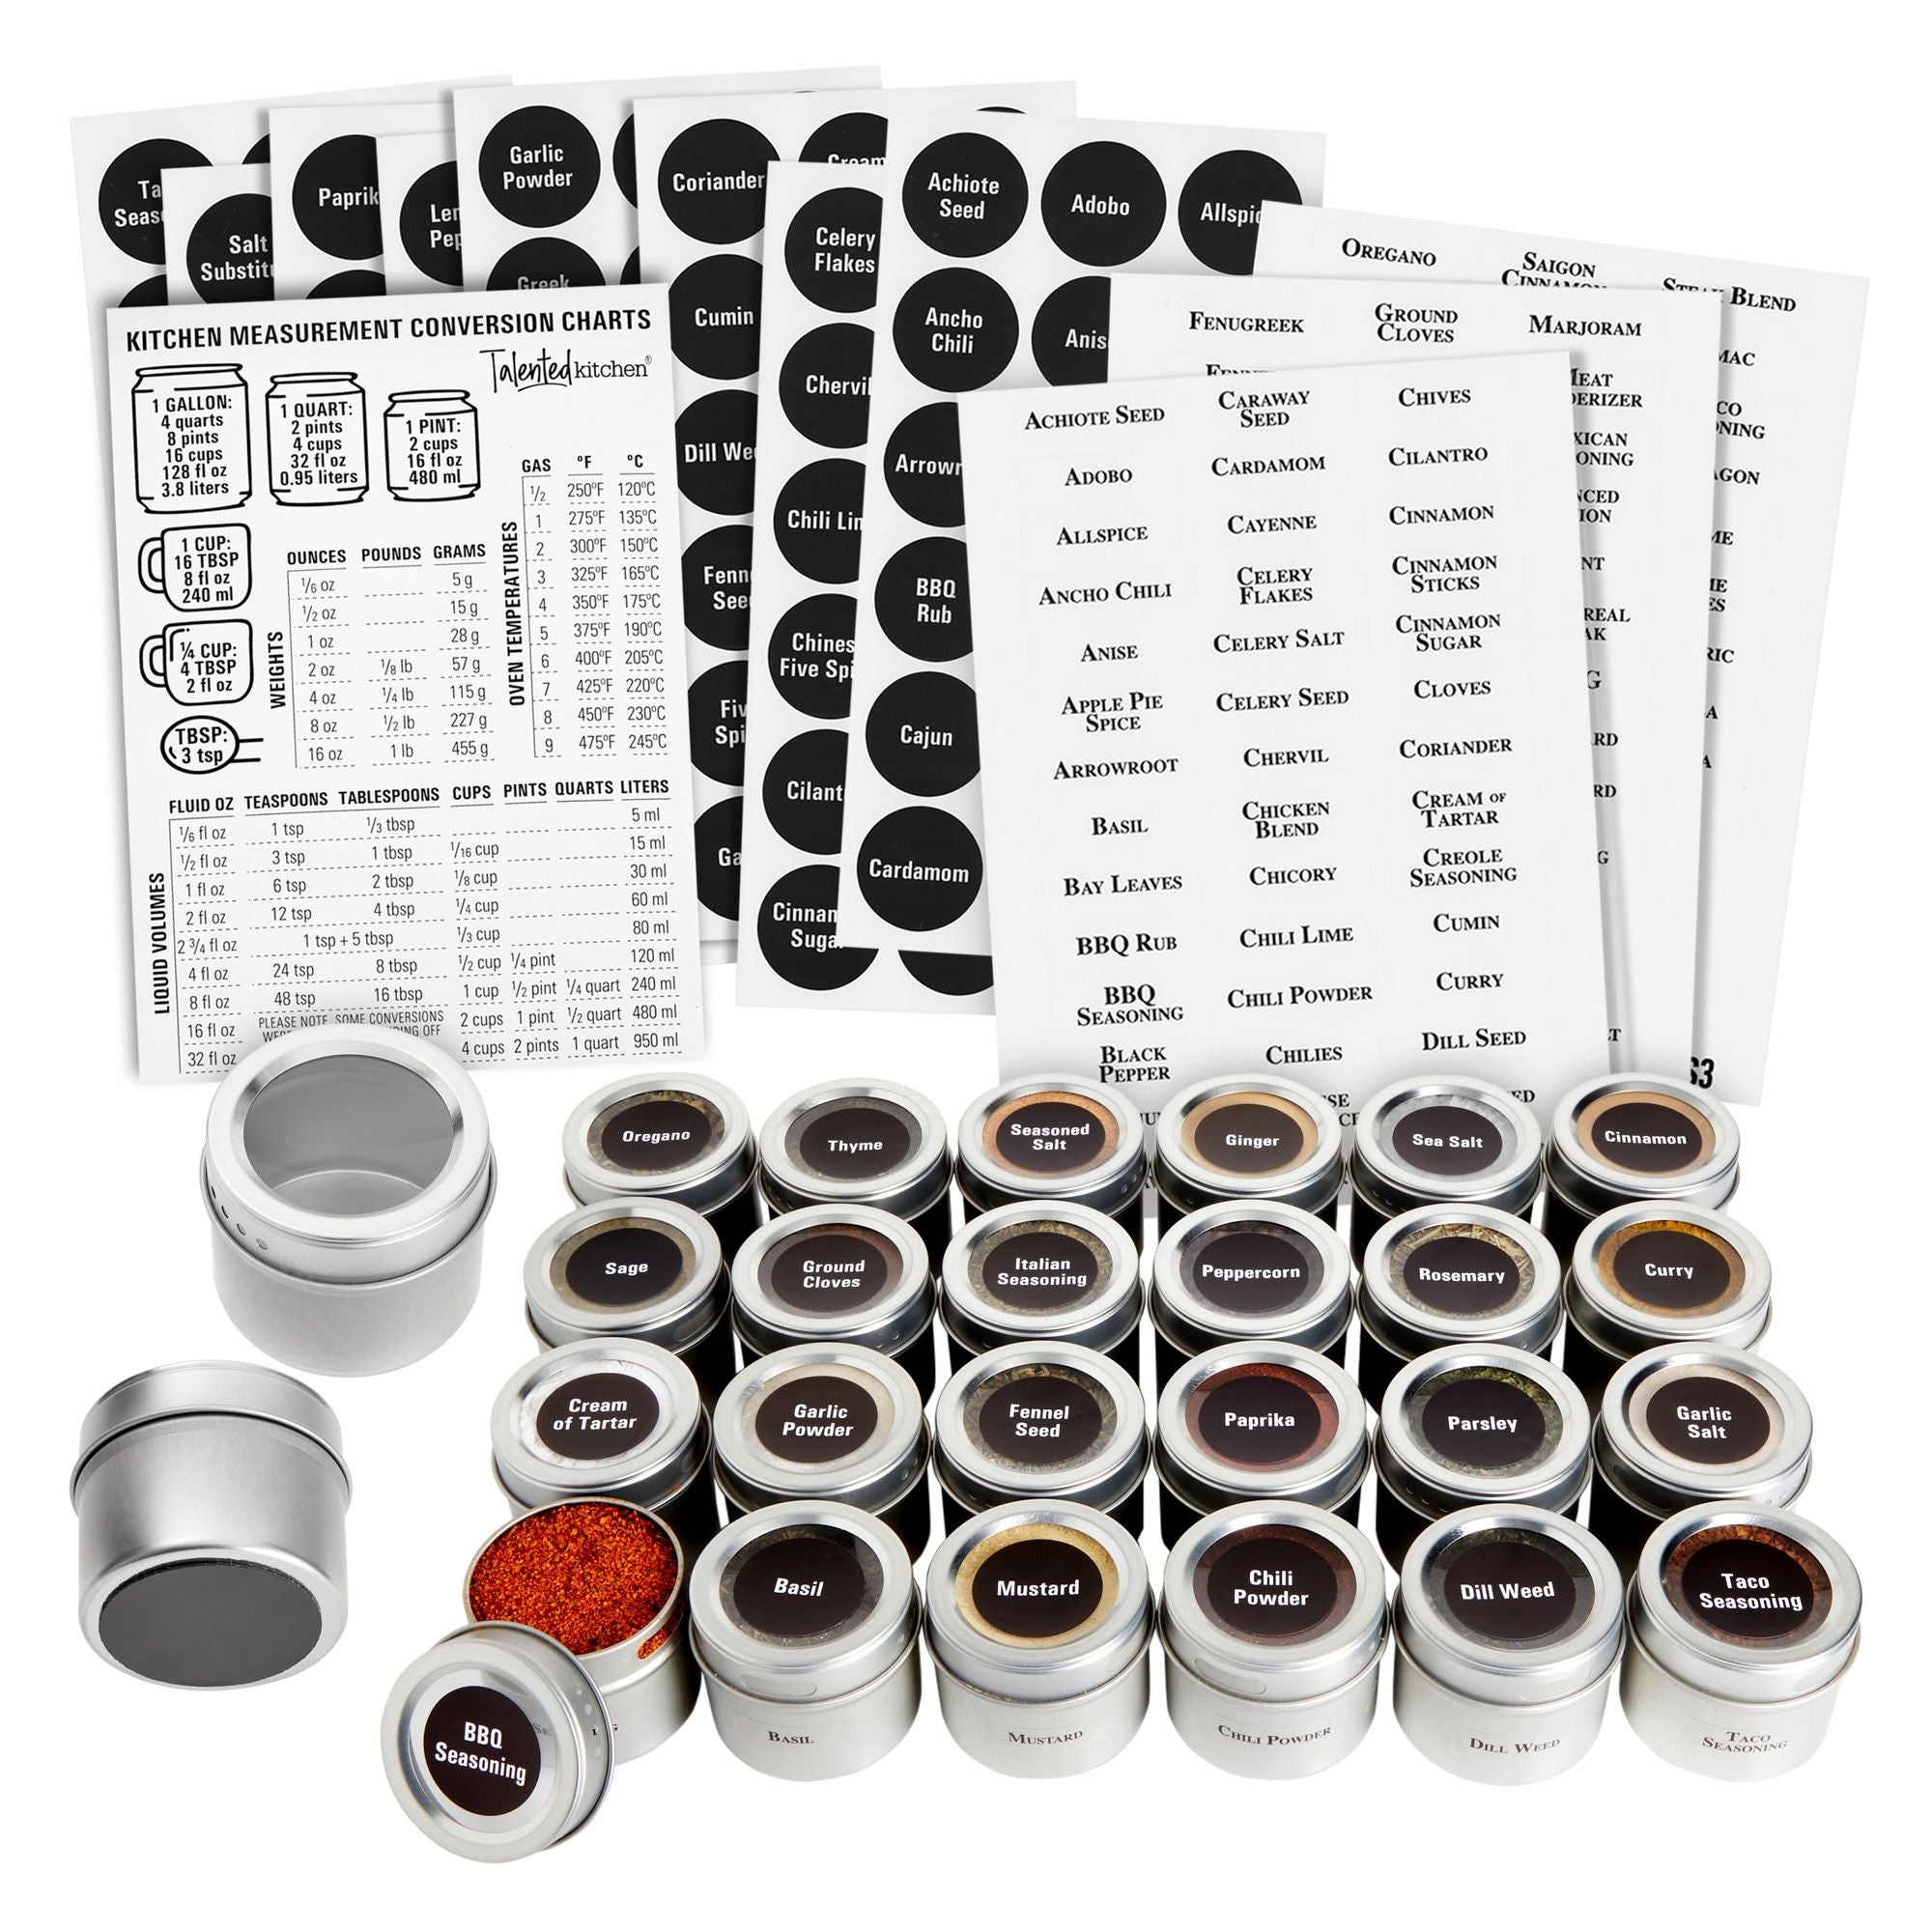 Talented Kitchen 125 Spice Labels Stickers, Clear Spice Jar Labels  Preprinted for Seasoning Herbs, Kitchen Spice Rack Organization, Water  Resistant